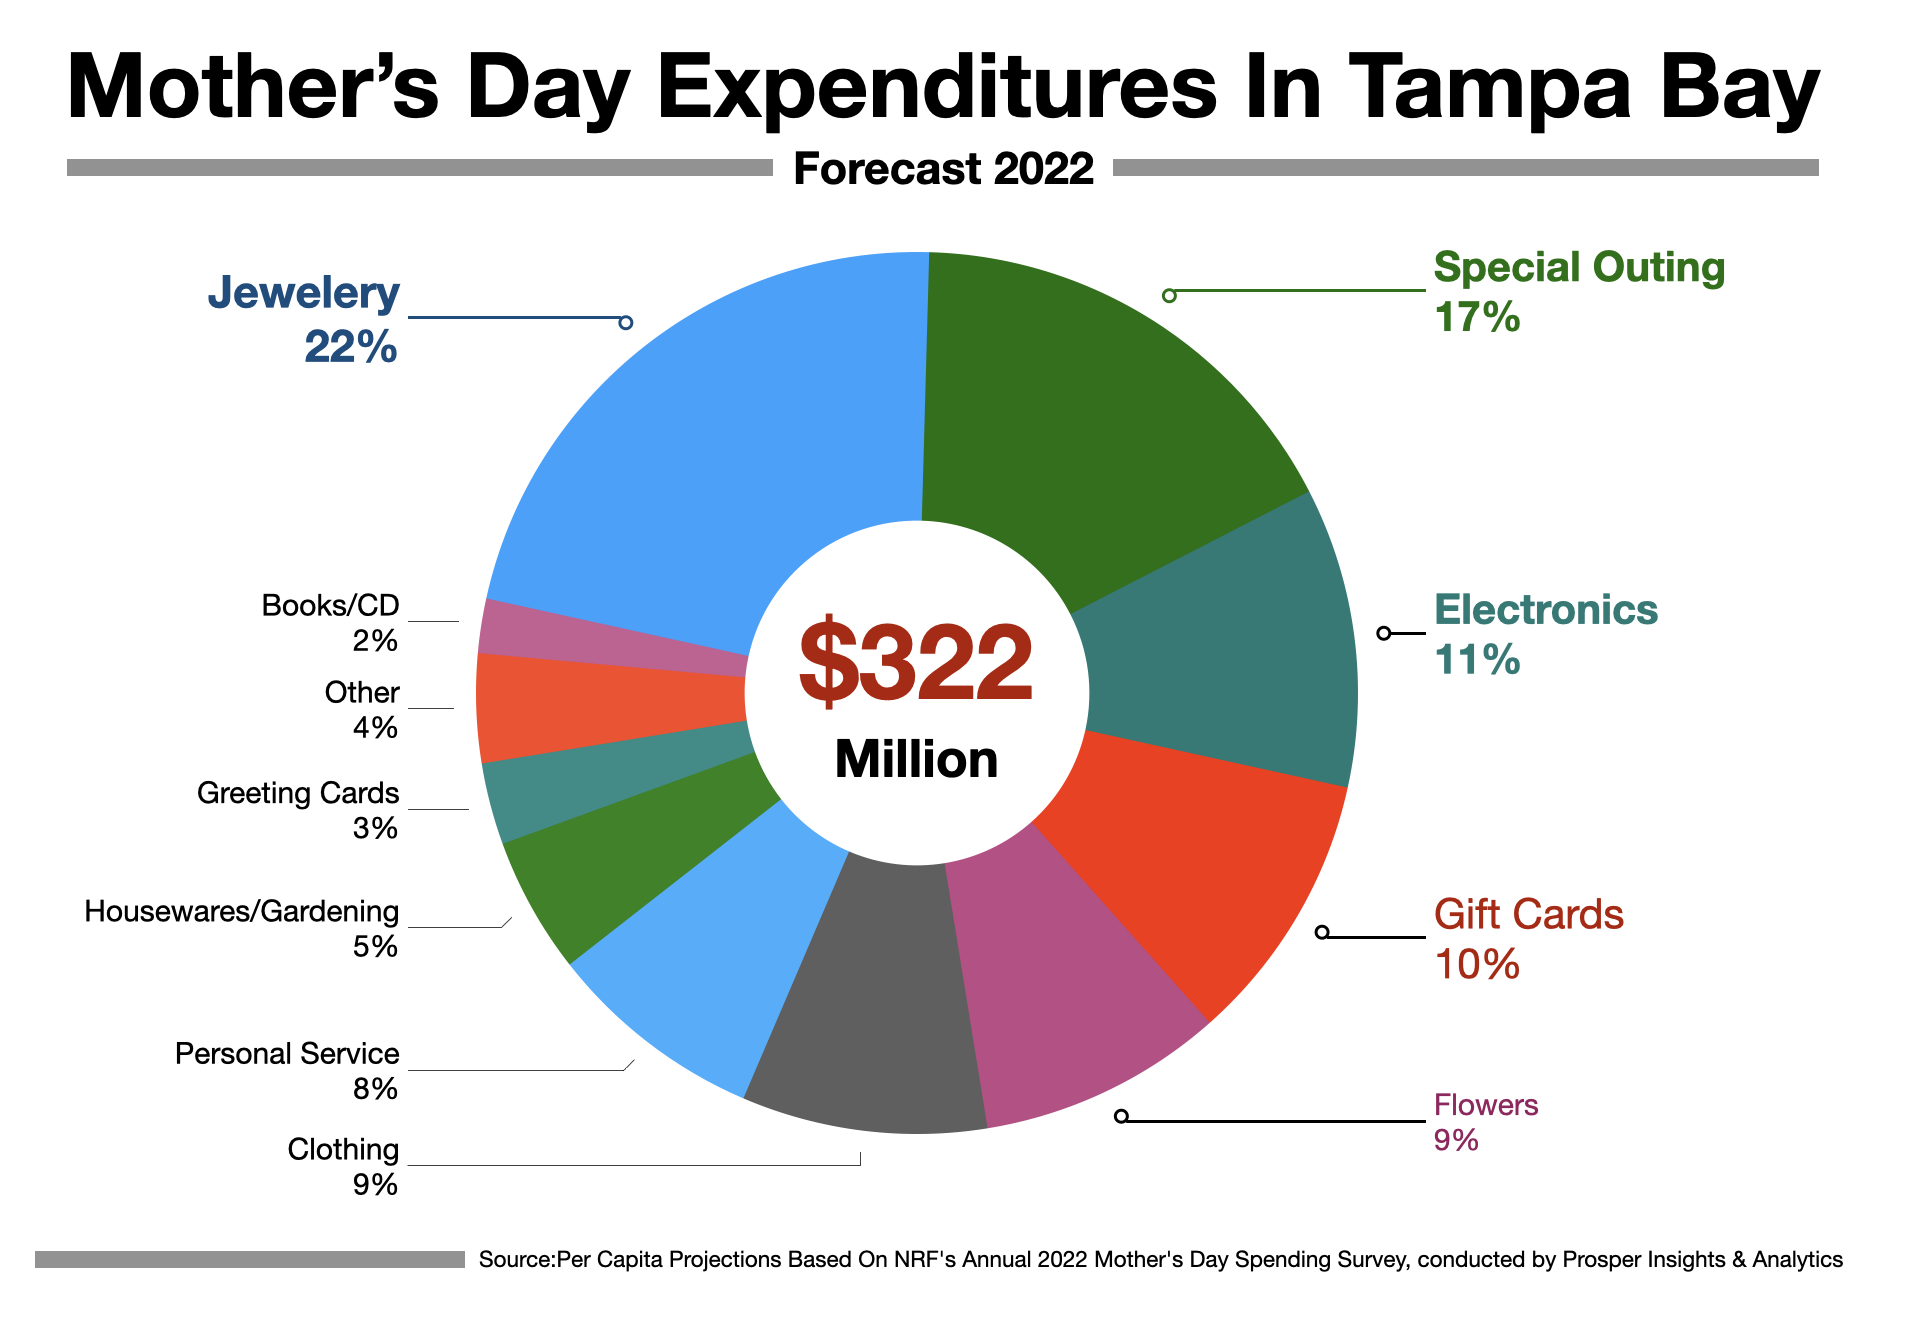 https://blog.advertiseintampa.com/hs-fs/hubfs/Mothers%20Day%20Advertising%20In%20Tampa%202022.png?noresize=true&width=632&name=Mothers%20Day%20Advertising%20In%20Tampa%202022.png